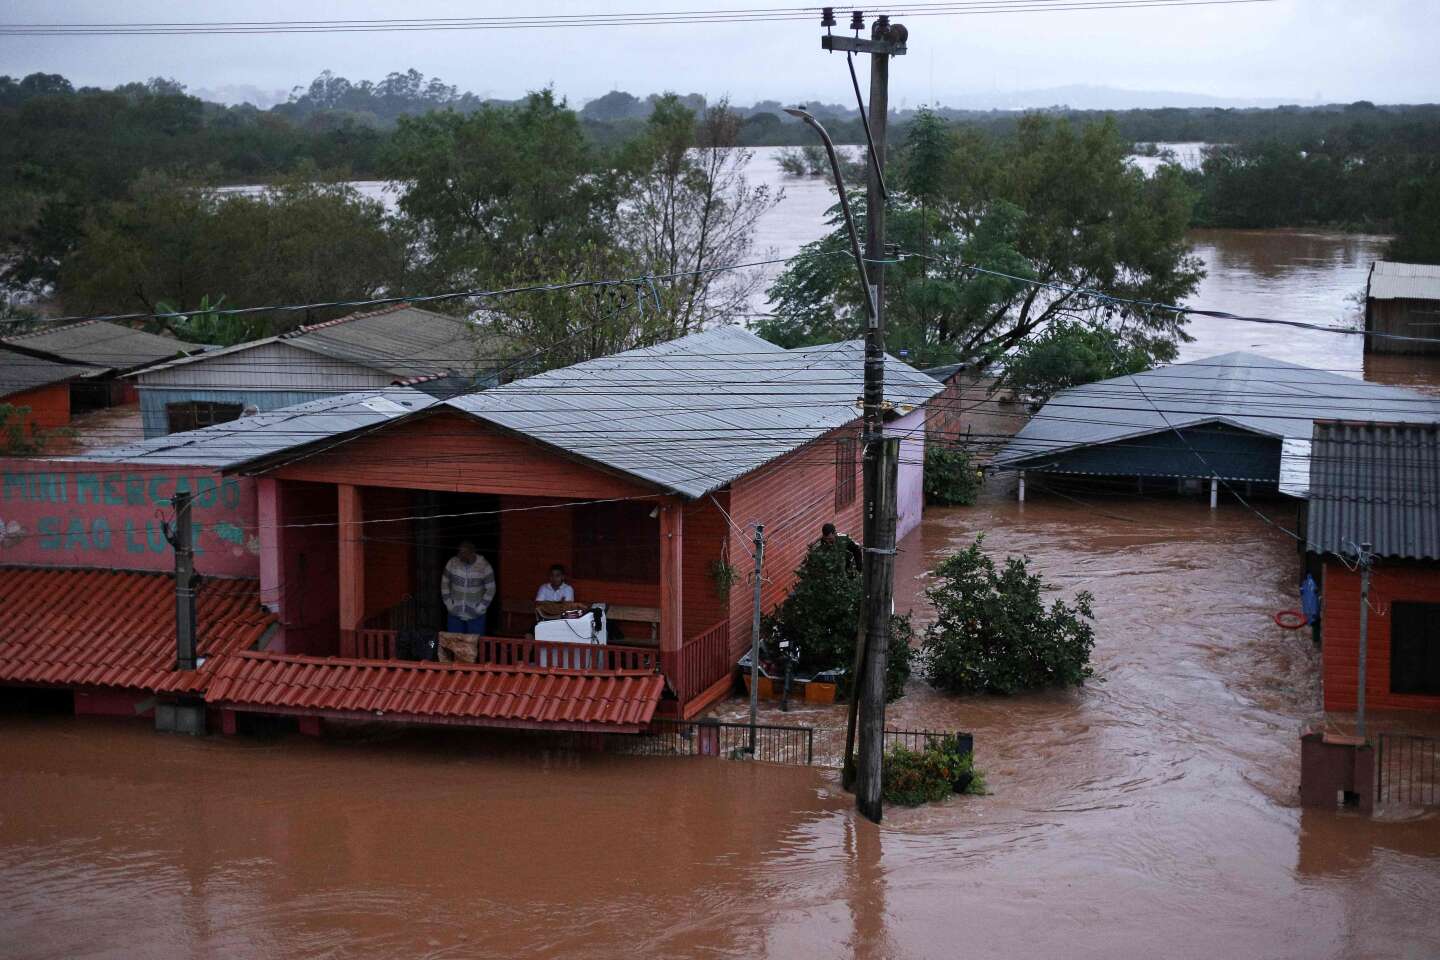 In Brazil, natural disasters associated with global warming are increasing